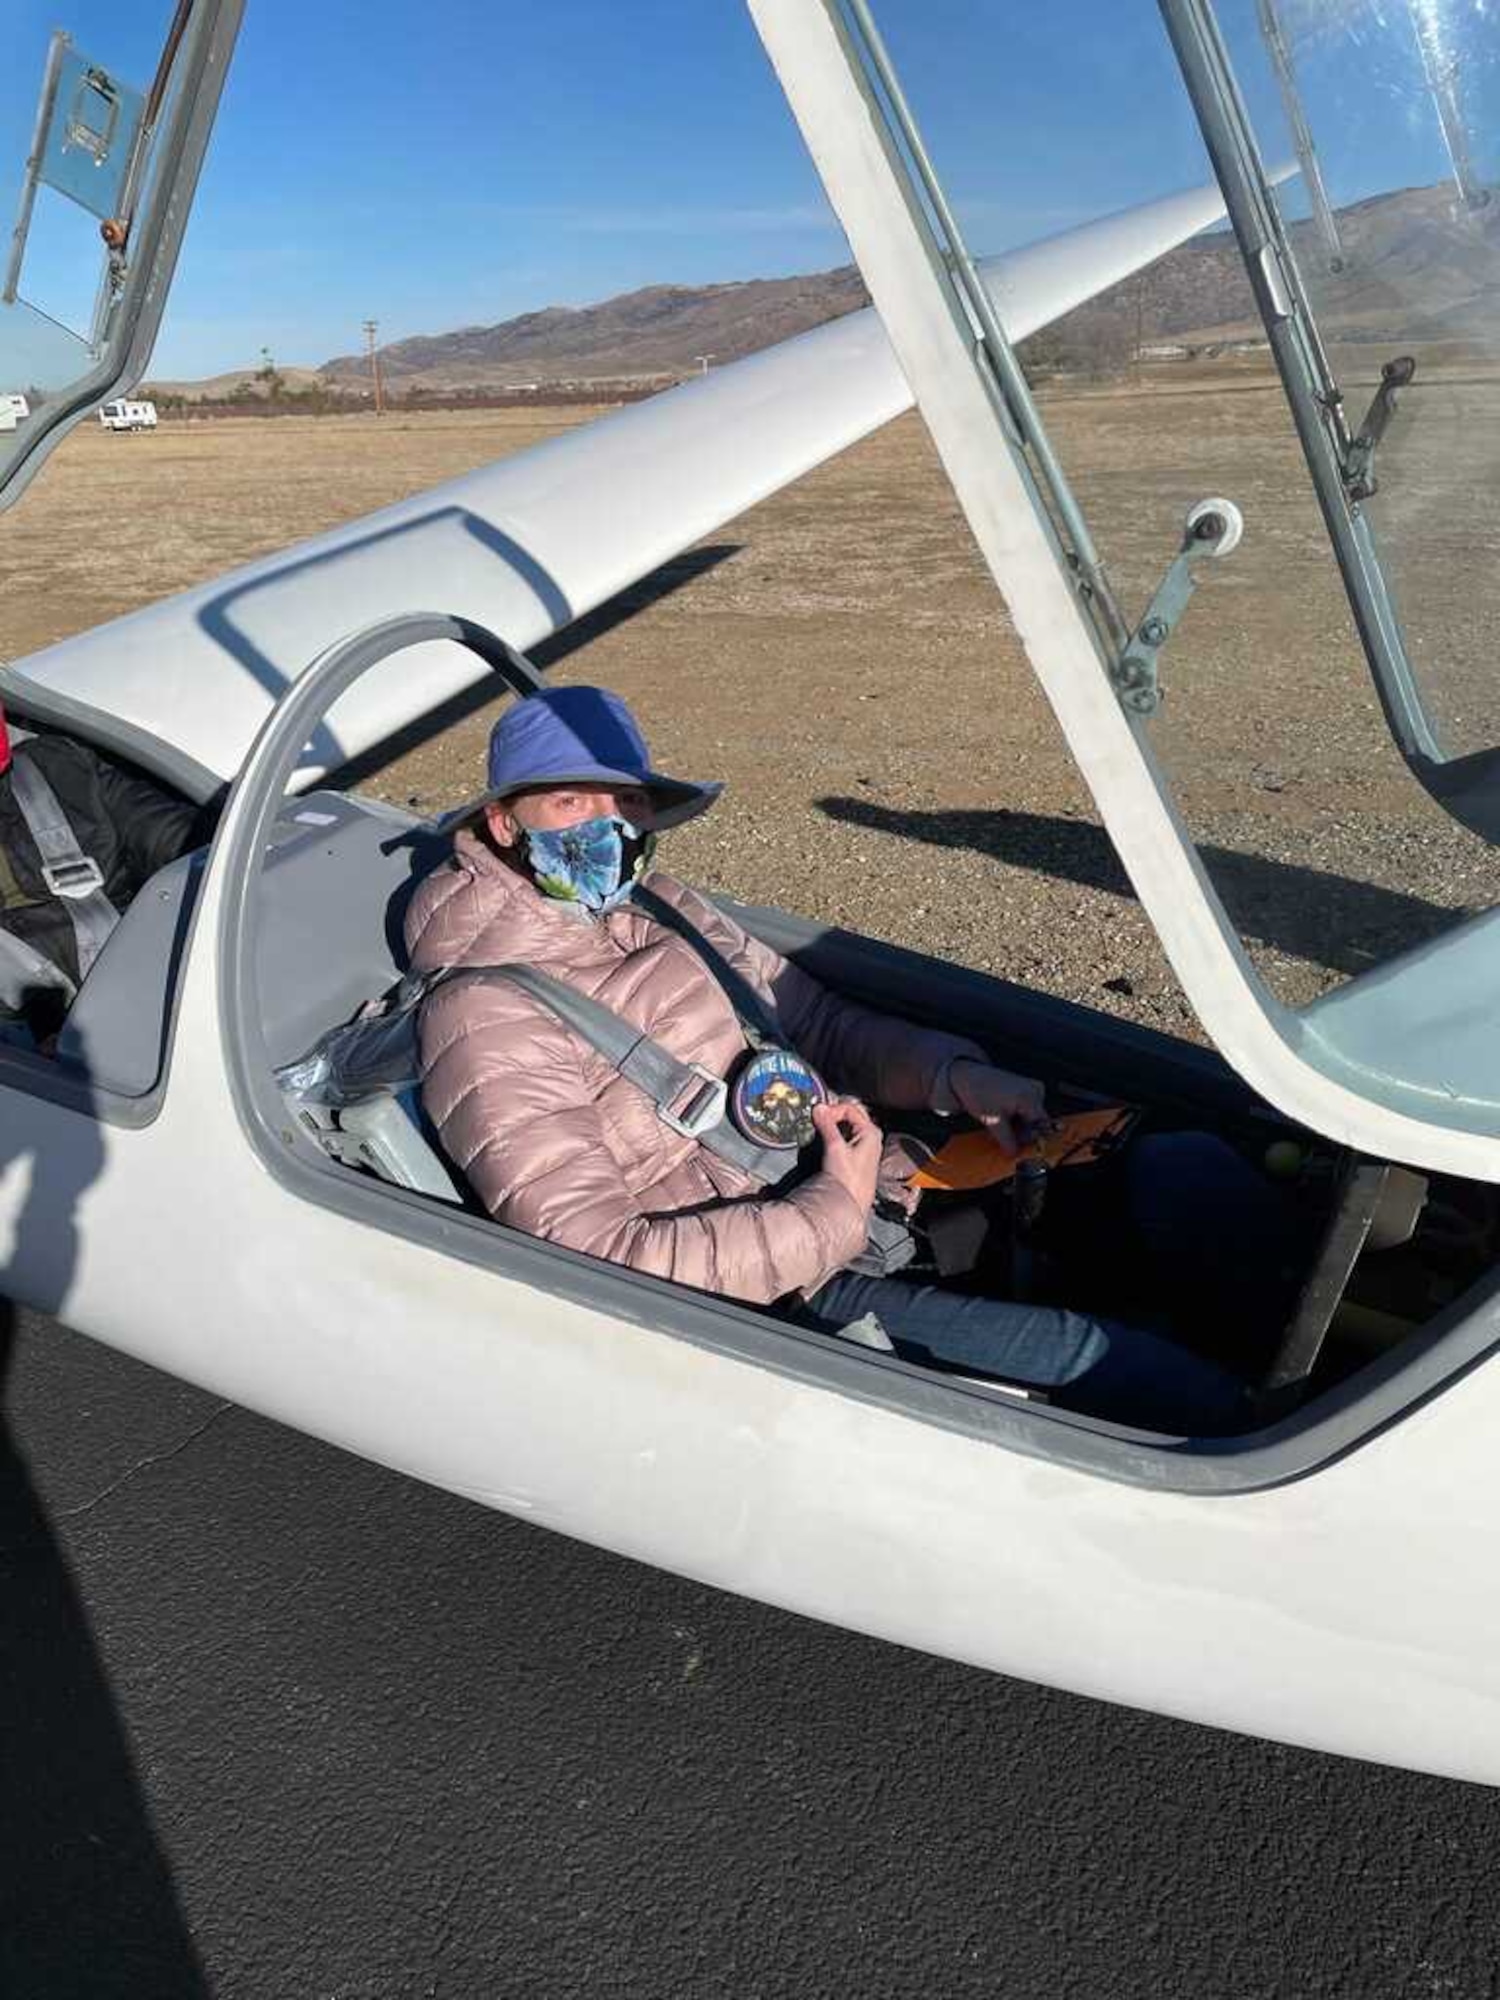 Air Force Research Laboratory Space Test Fundamentals course graduate Evelyn Kent gets ready for one of her course highlights – a glider ride. Kent is a member of the small cadre that graduated from the first STF course, which was held at the U.S. Air Force’s Test Pilot School at Edwards AFB, California. She is taking along the “Fly Like a Girl” patch to be given to girls in Science, Technology, Engineering, and Math (STEM). (Courtesy photo)